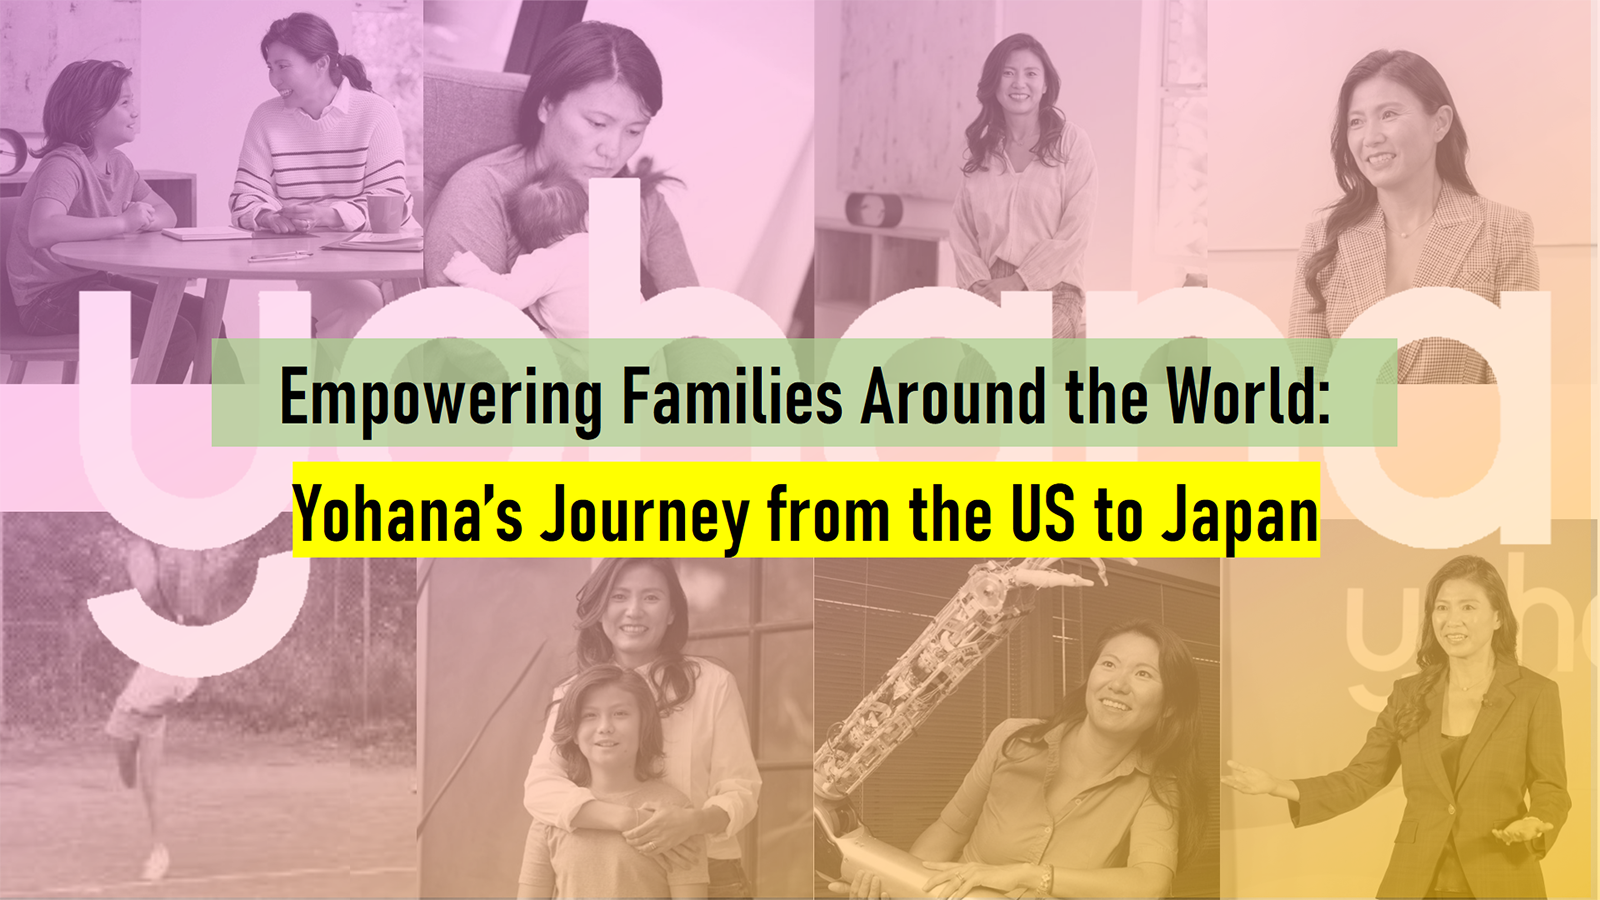 Empowering Families Around the World: Yohana’s Journey from the US to Japan